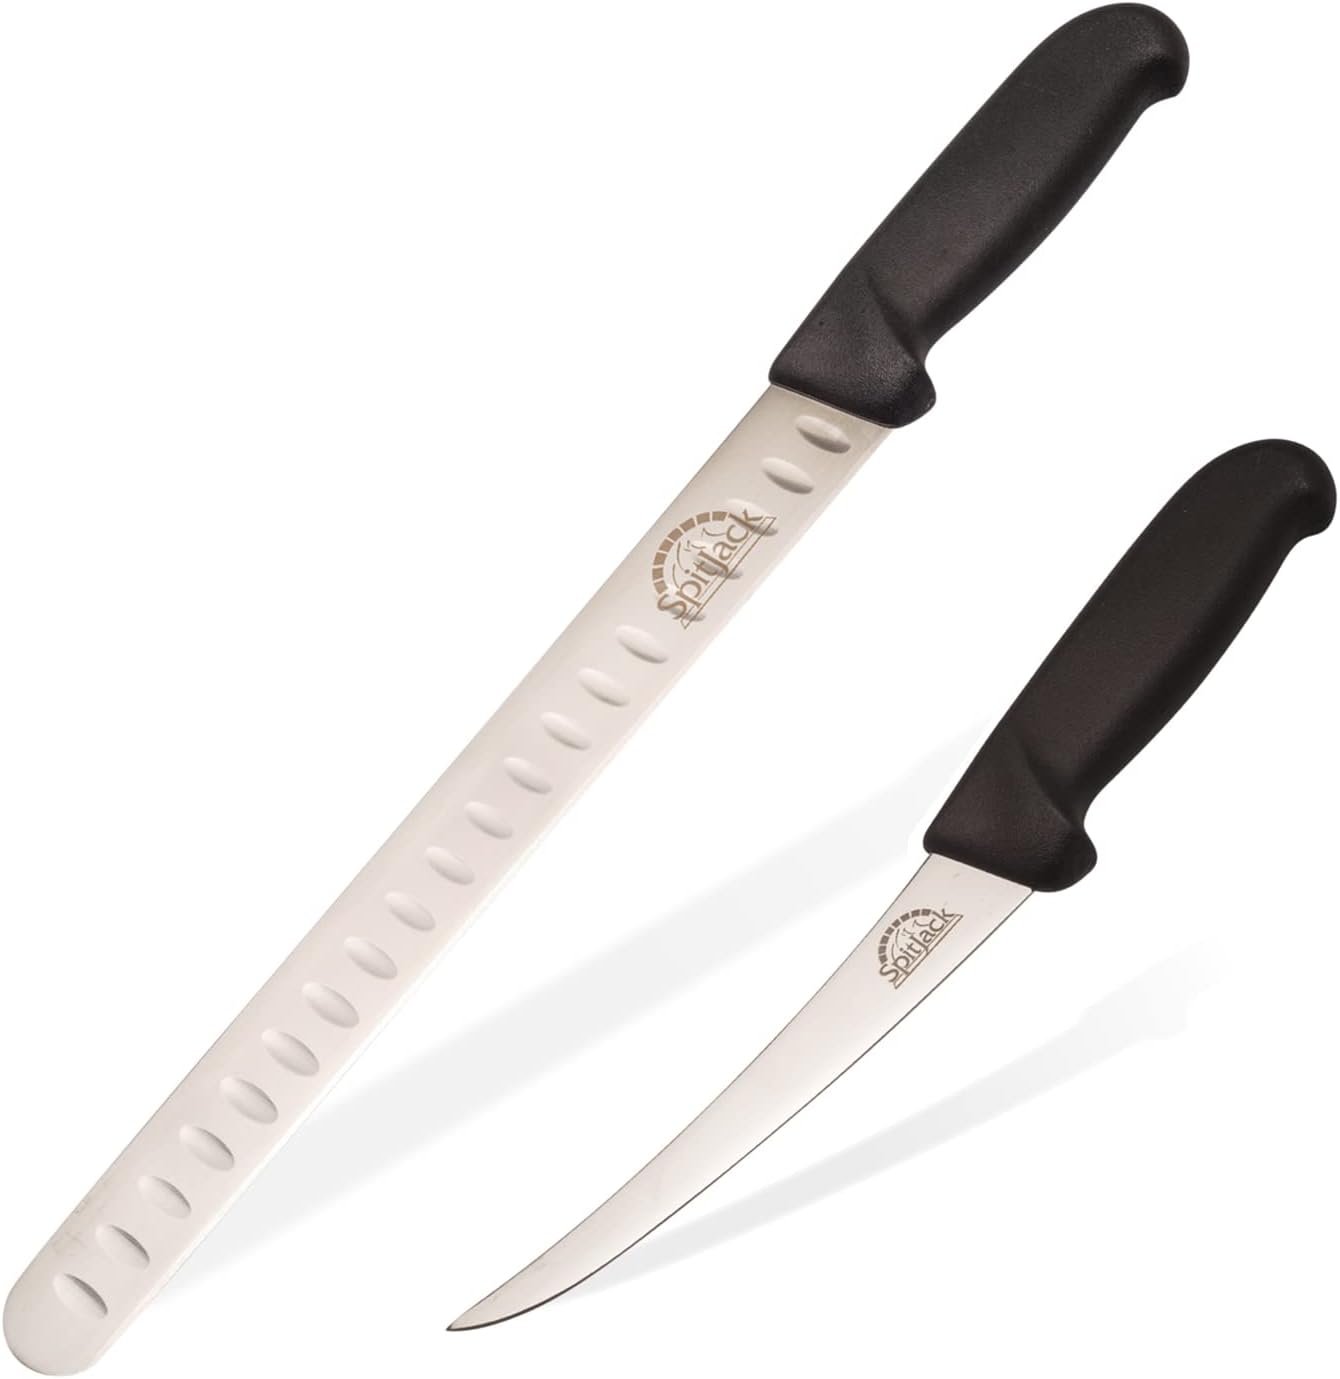 MAIRICO Ultra Sharp Premium 11-Inch Stainless Steel Carving Knife